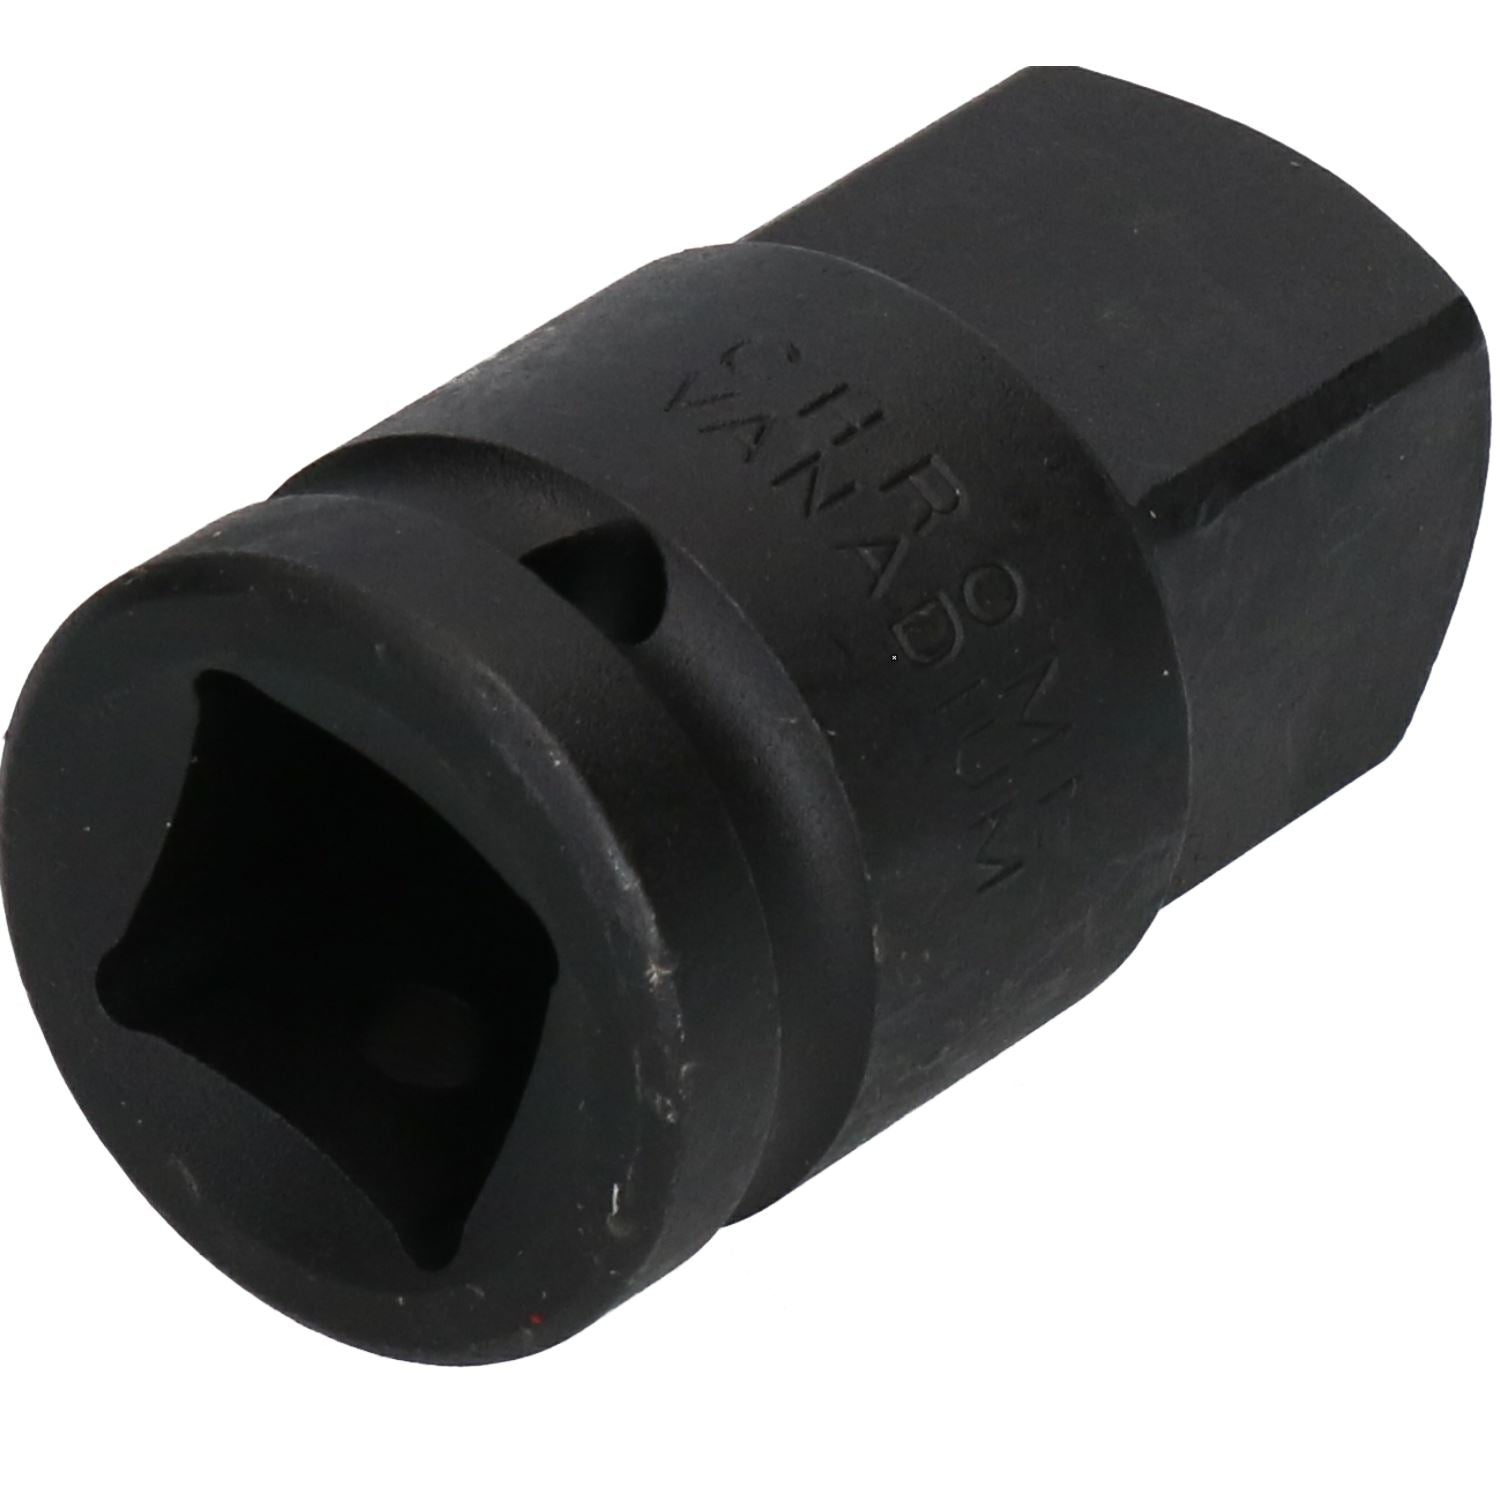 30mm Metric 3/4" or 1" Drive Deep Impact Socket 6 Sided With Step Up Adapter